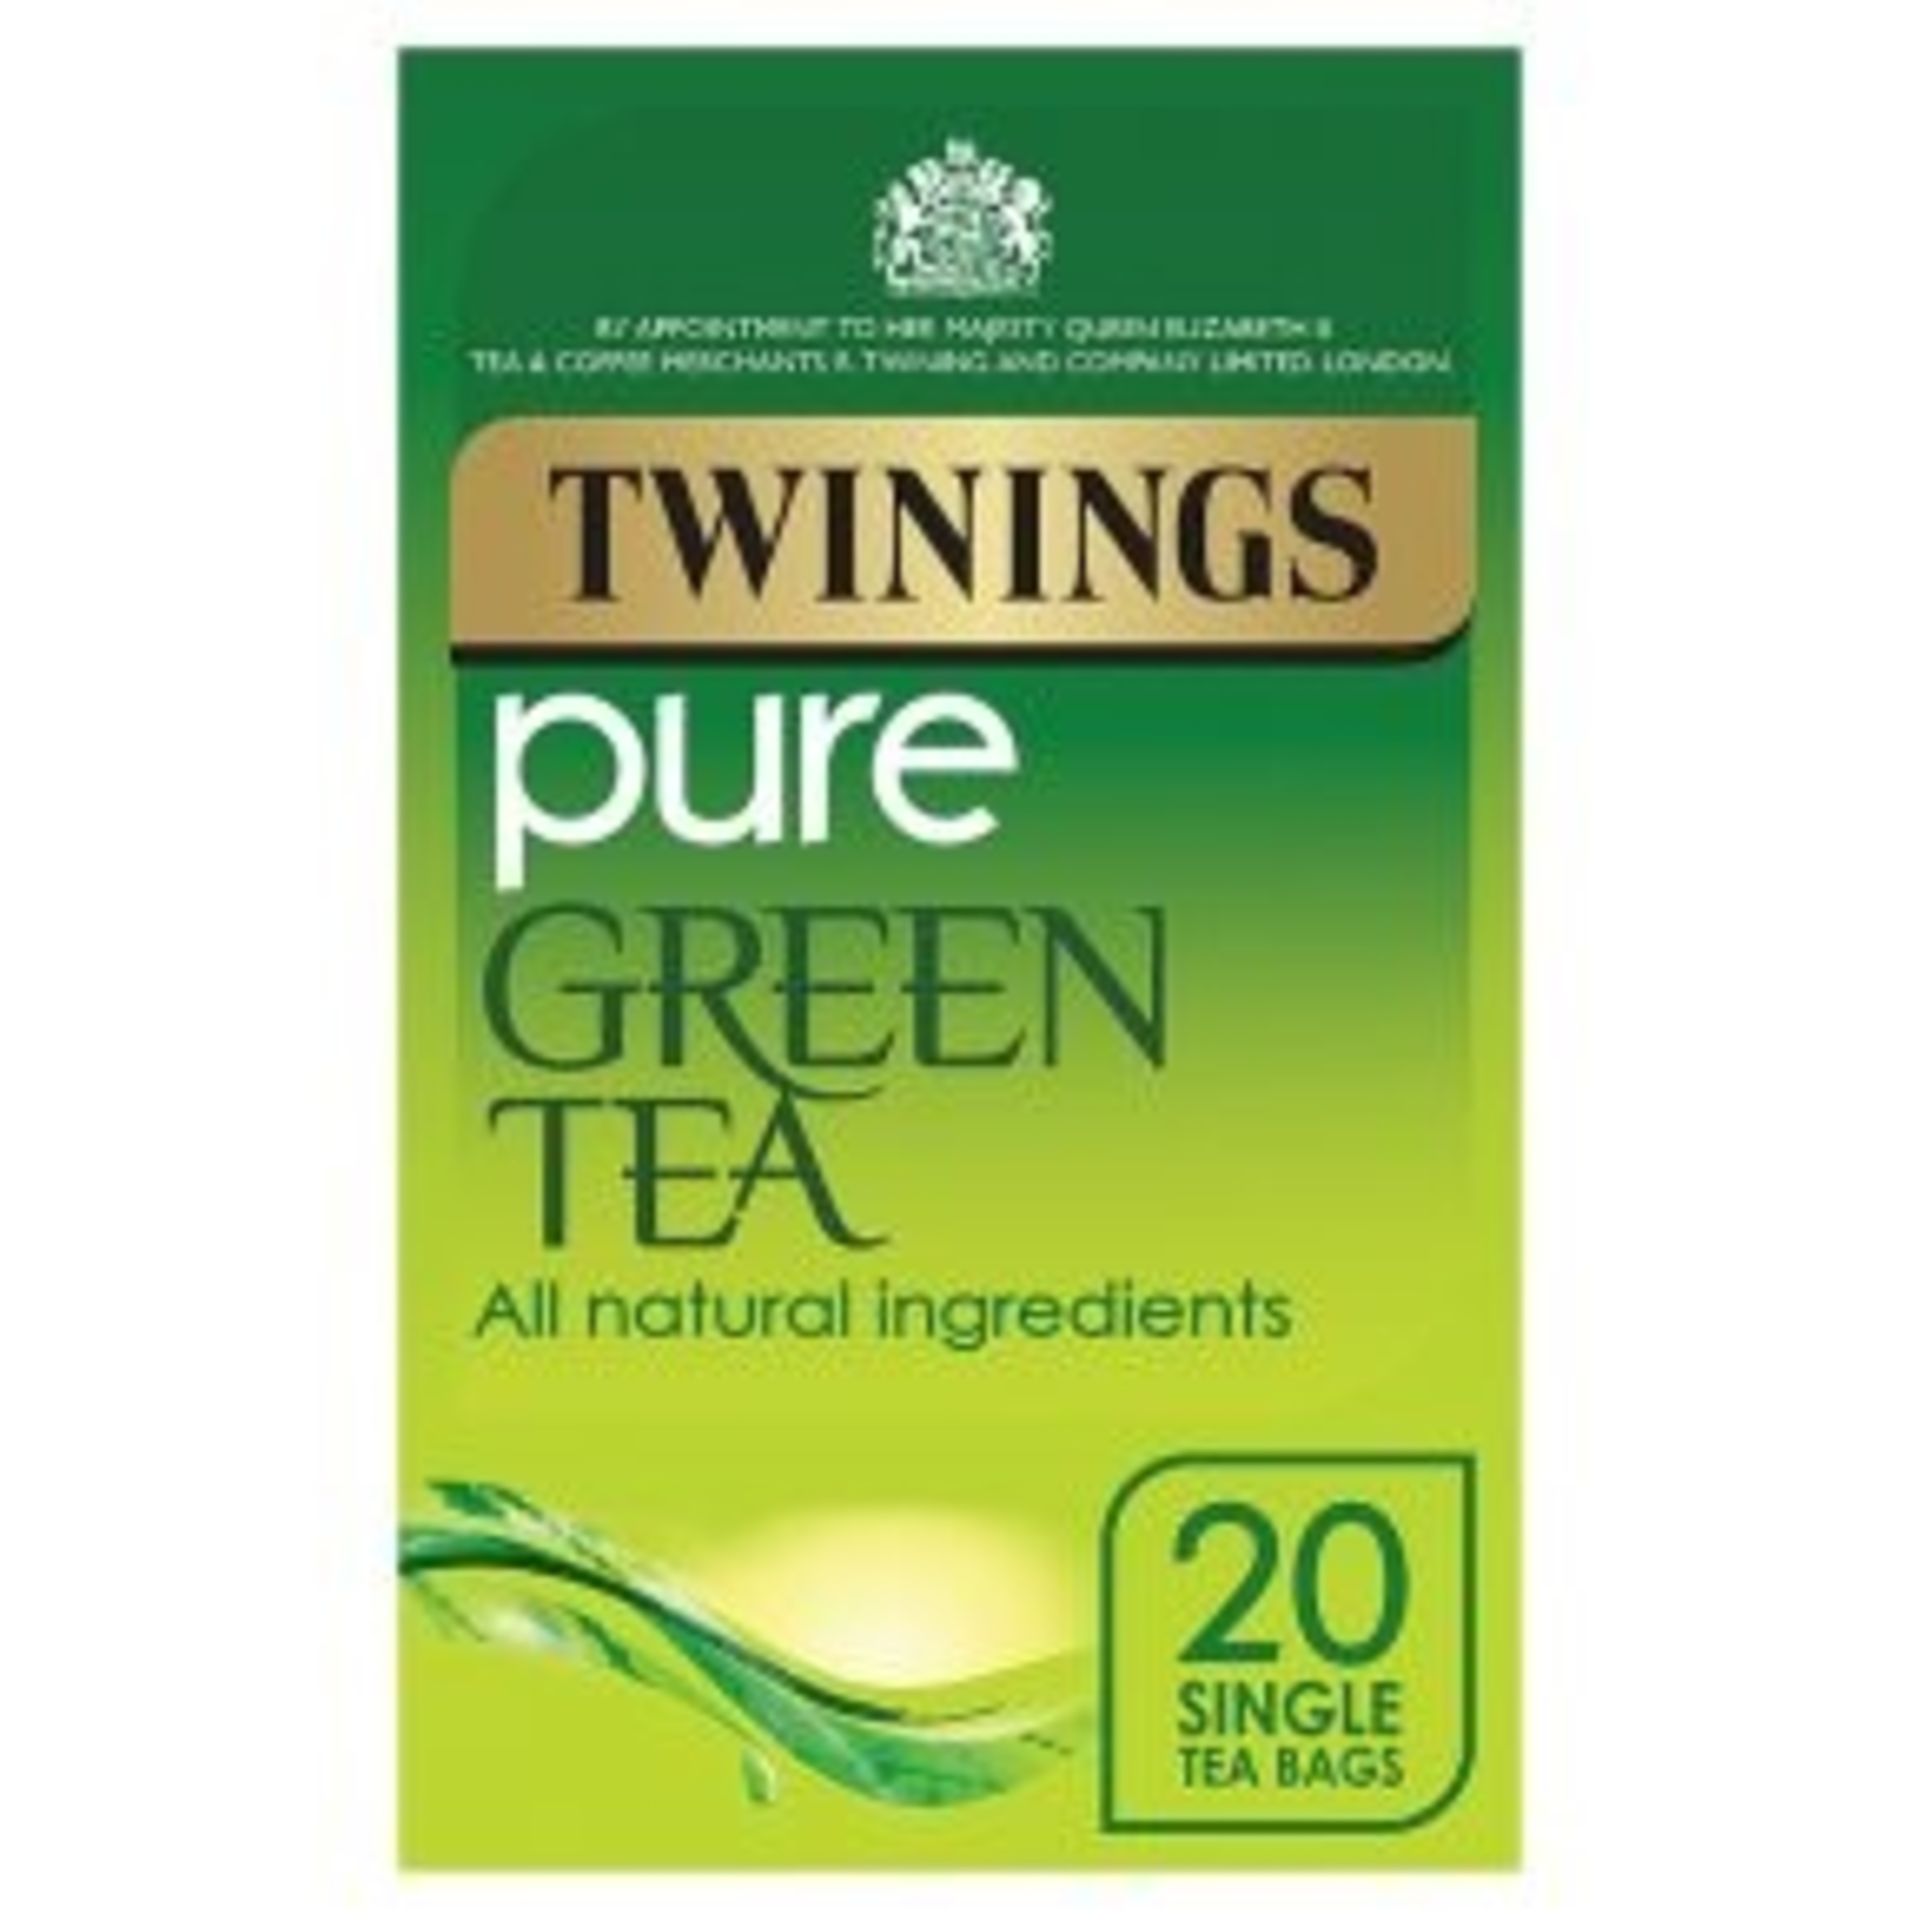 1 LOT TO CONTAIN 5 BOX OF 12 TWININGS PURE GREEN TEA / BEST BEFORE DATE 08/11/18 / RRP £90.00 (